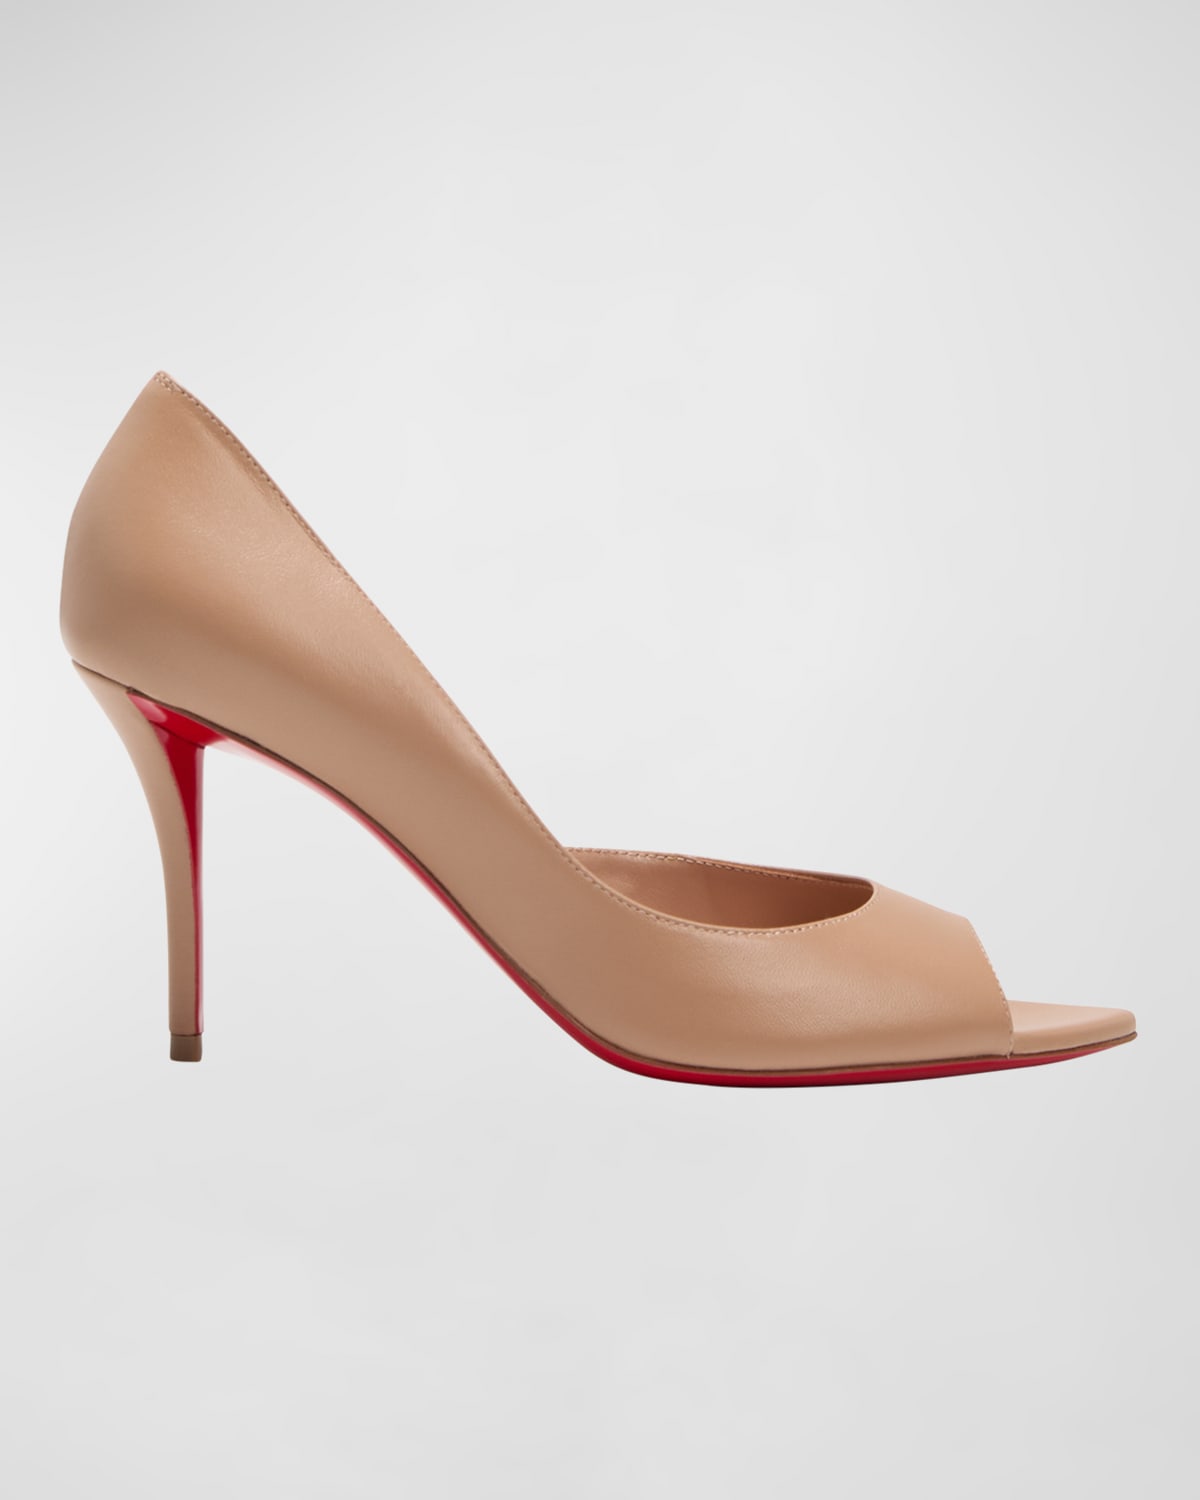 CHRISTIAN LOUBOUTIN APOSTROPHA LEATHER HALF-D'ORSAY RED SOLE PUMPS